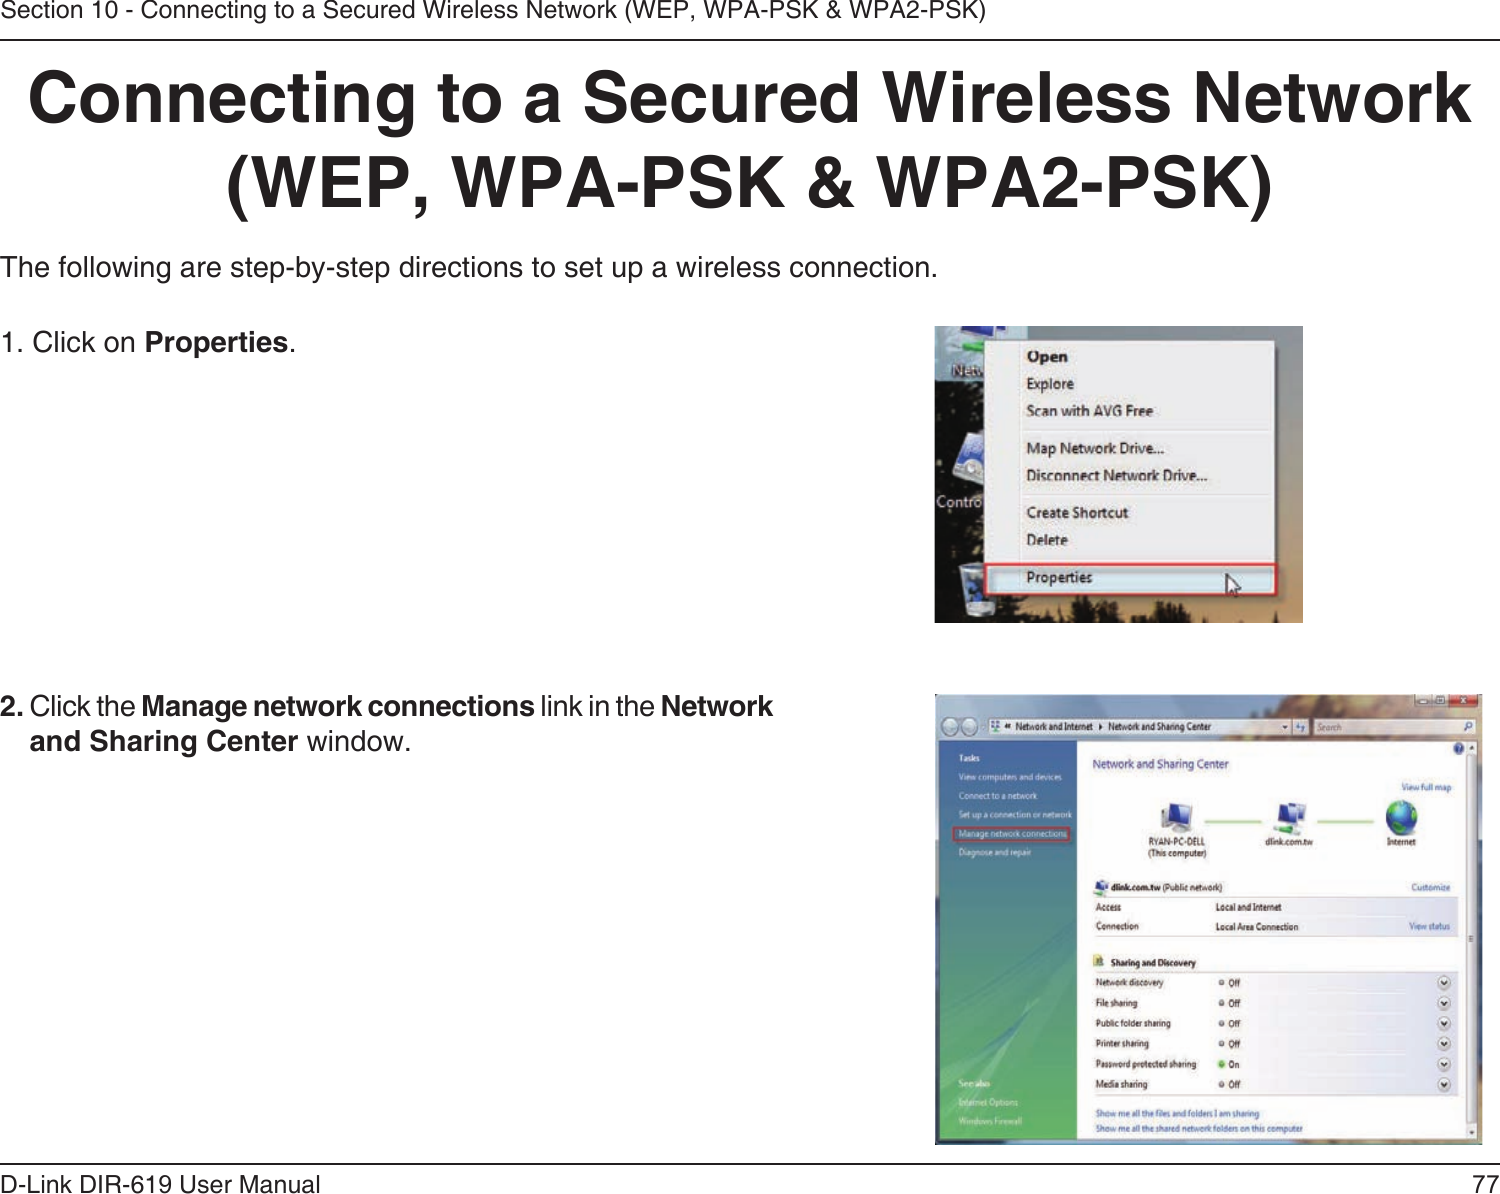 77D-Link DIR-619 User ManualSection 10 - Connecting to a Secured Wireless Network (WEP, WPA-PSK &amp; WPA2-PSK)Connecting to a Secured Wireless Network (WEP, WPA-PSK &amp; WPA2-PSK)The following are step-by-step directions to set up a wireless connection.2. Click the Manage network connections link in the Network and Sharing Center window. 1. Click on Properties.